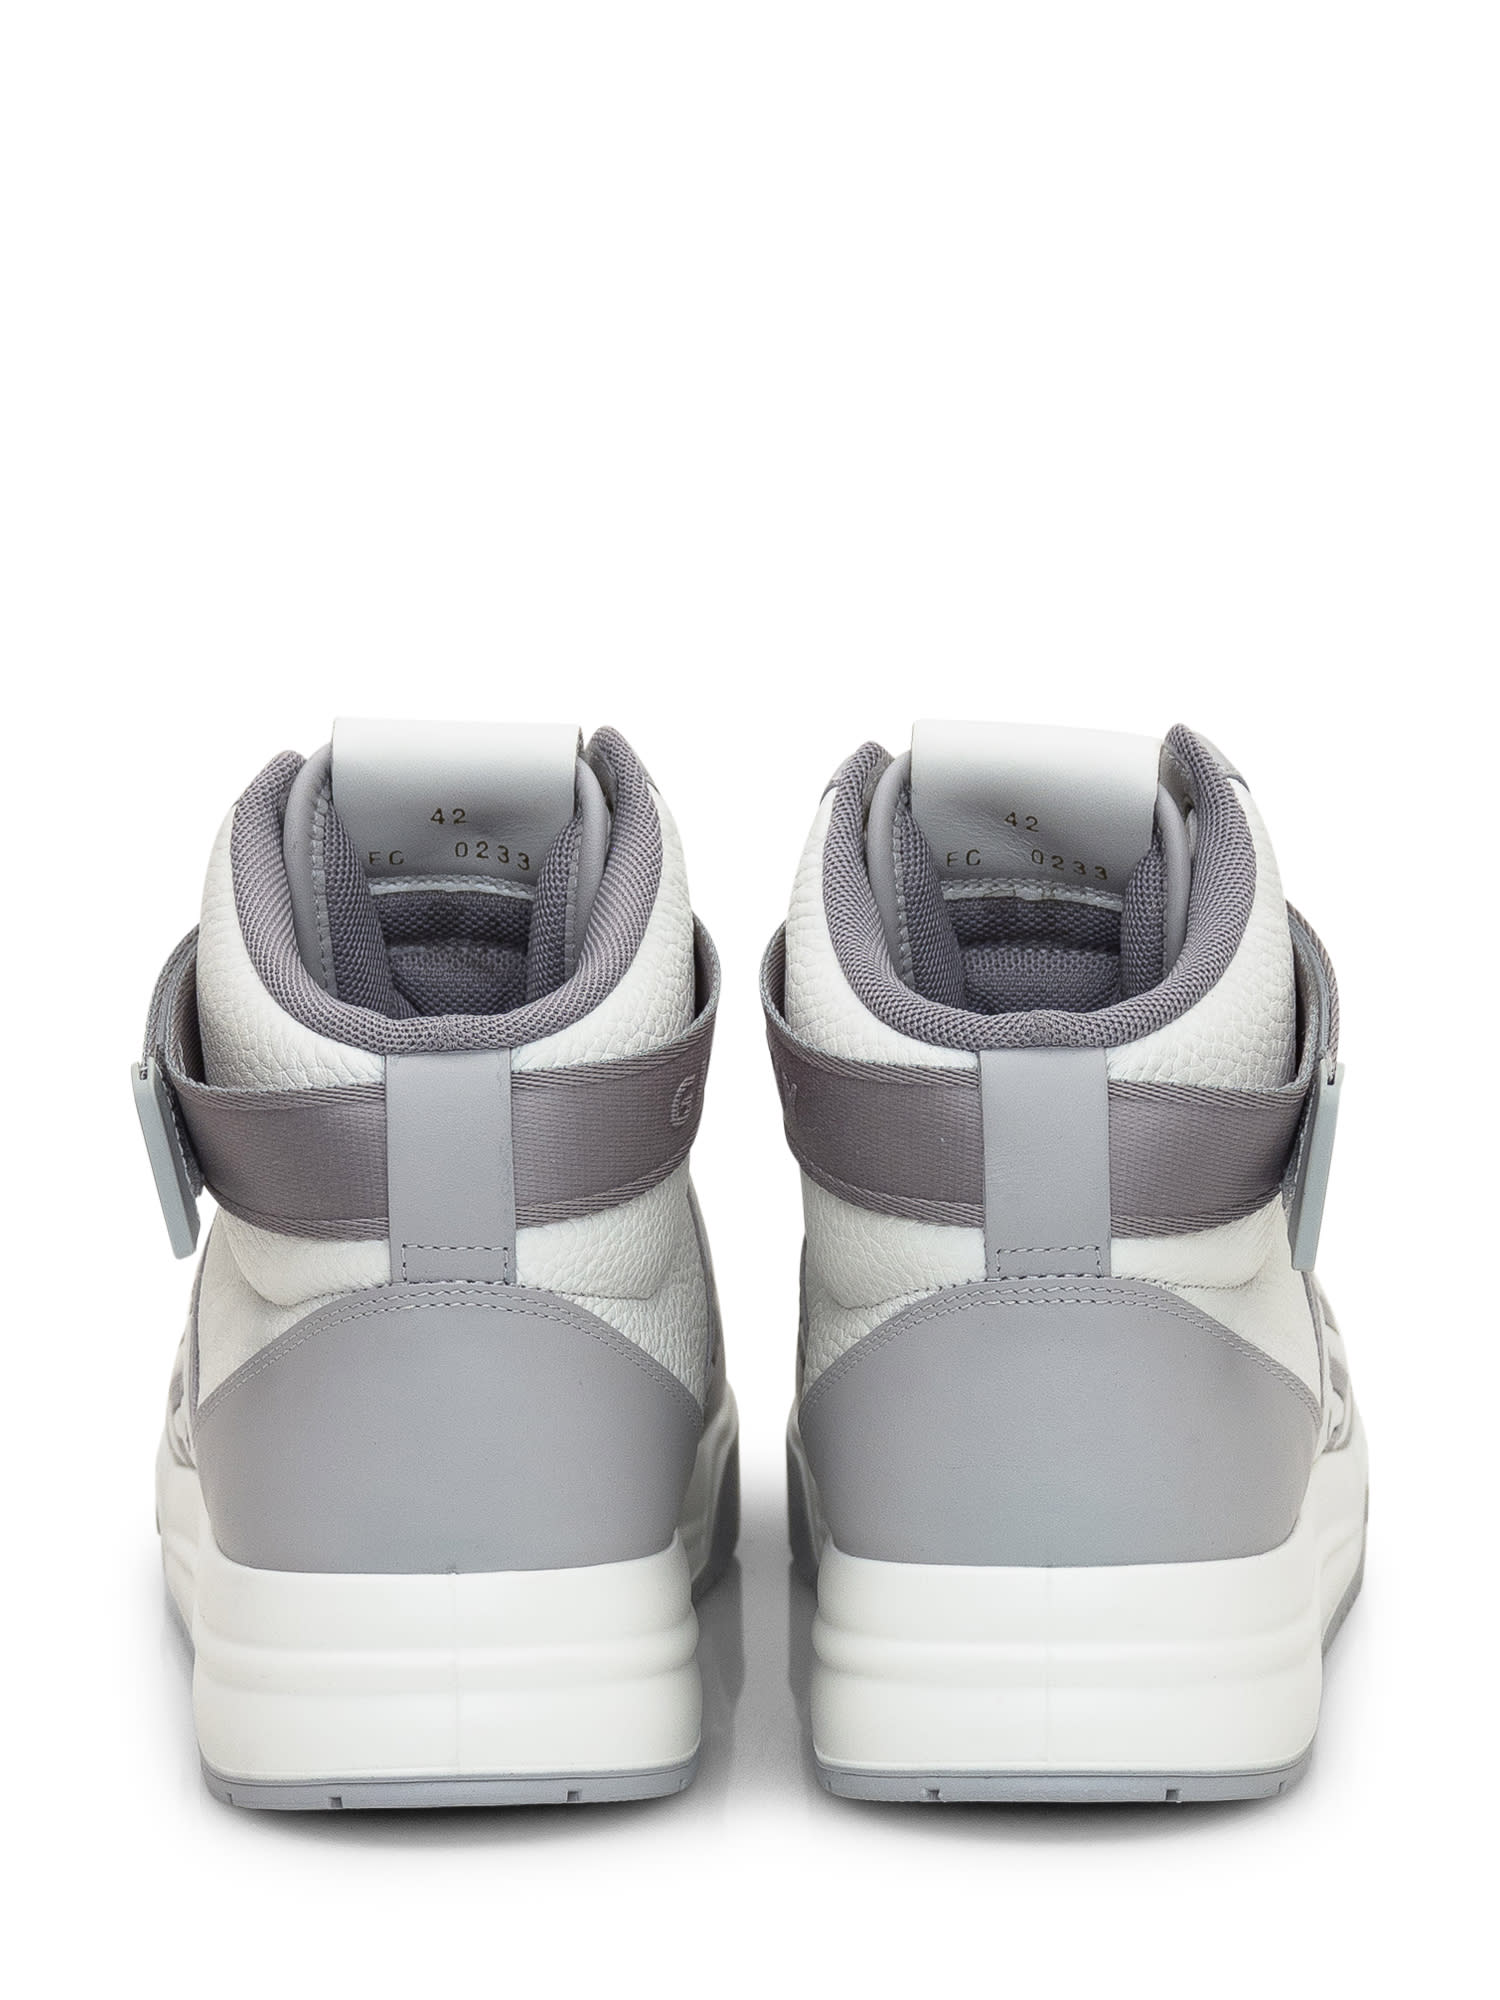 Shop Givenchy G4 High Sneaker In White